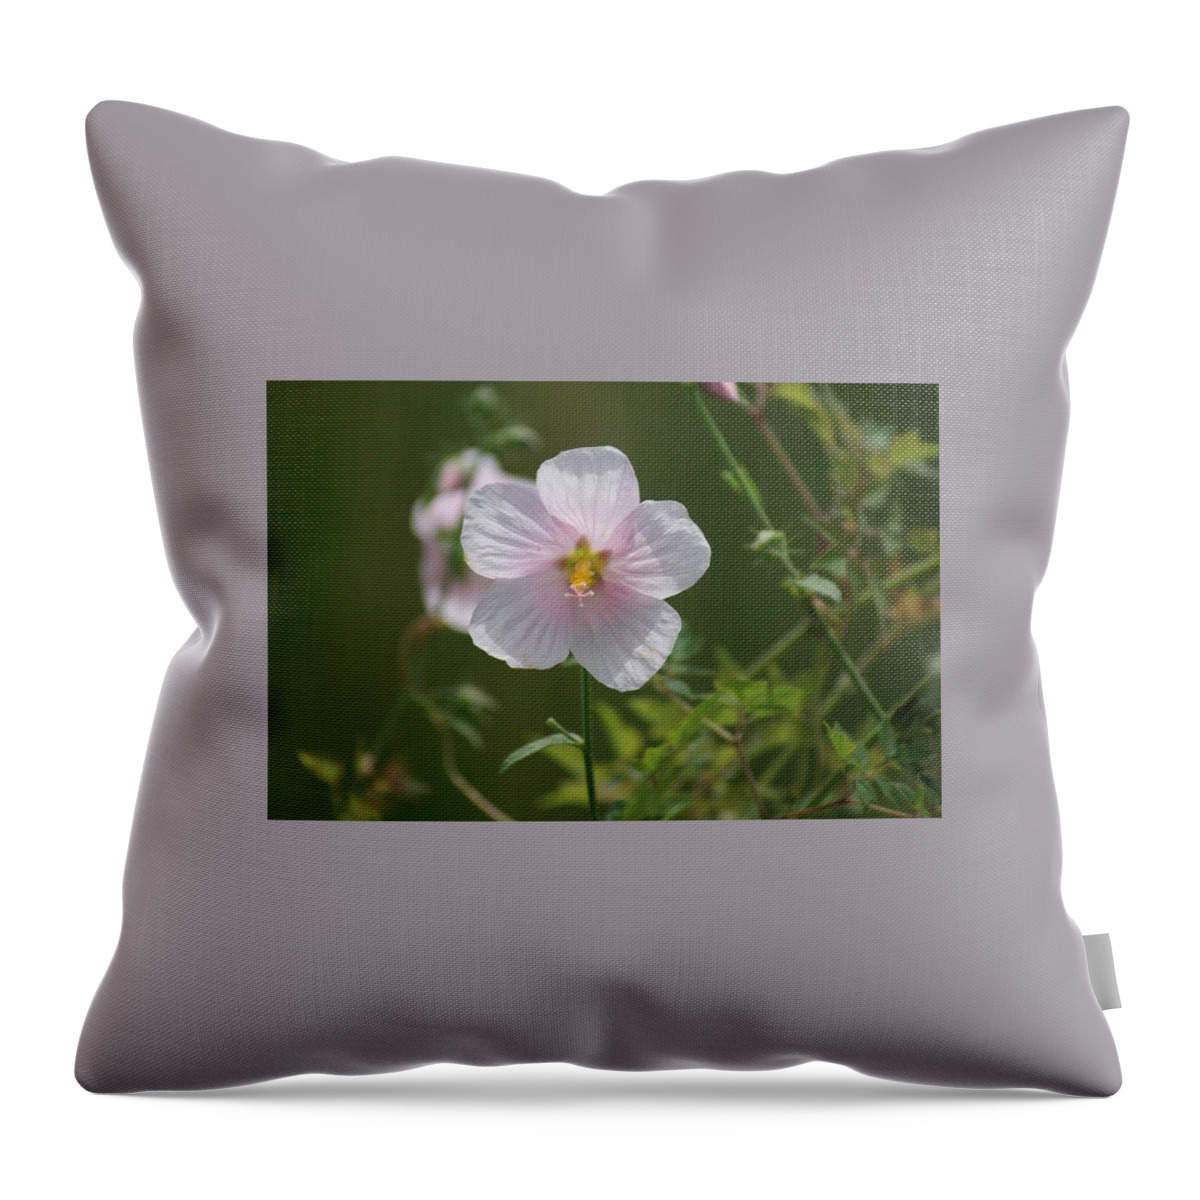 Florida Throw Pillow featuring the photograph Florida Flowers by Lindsey Floyd